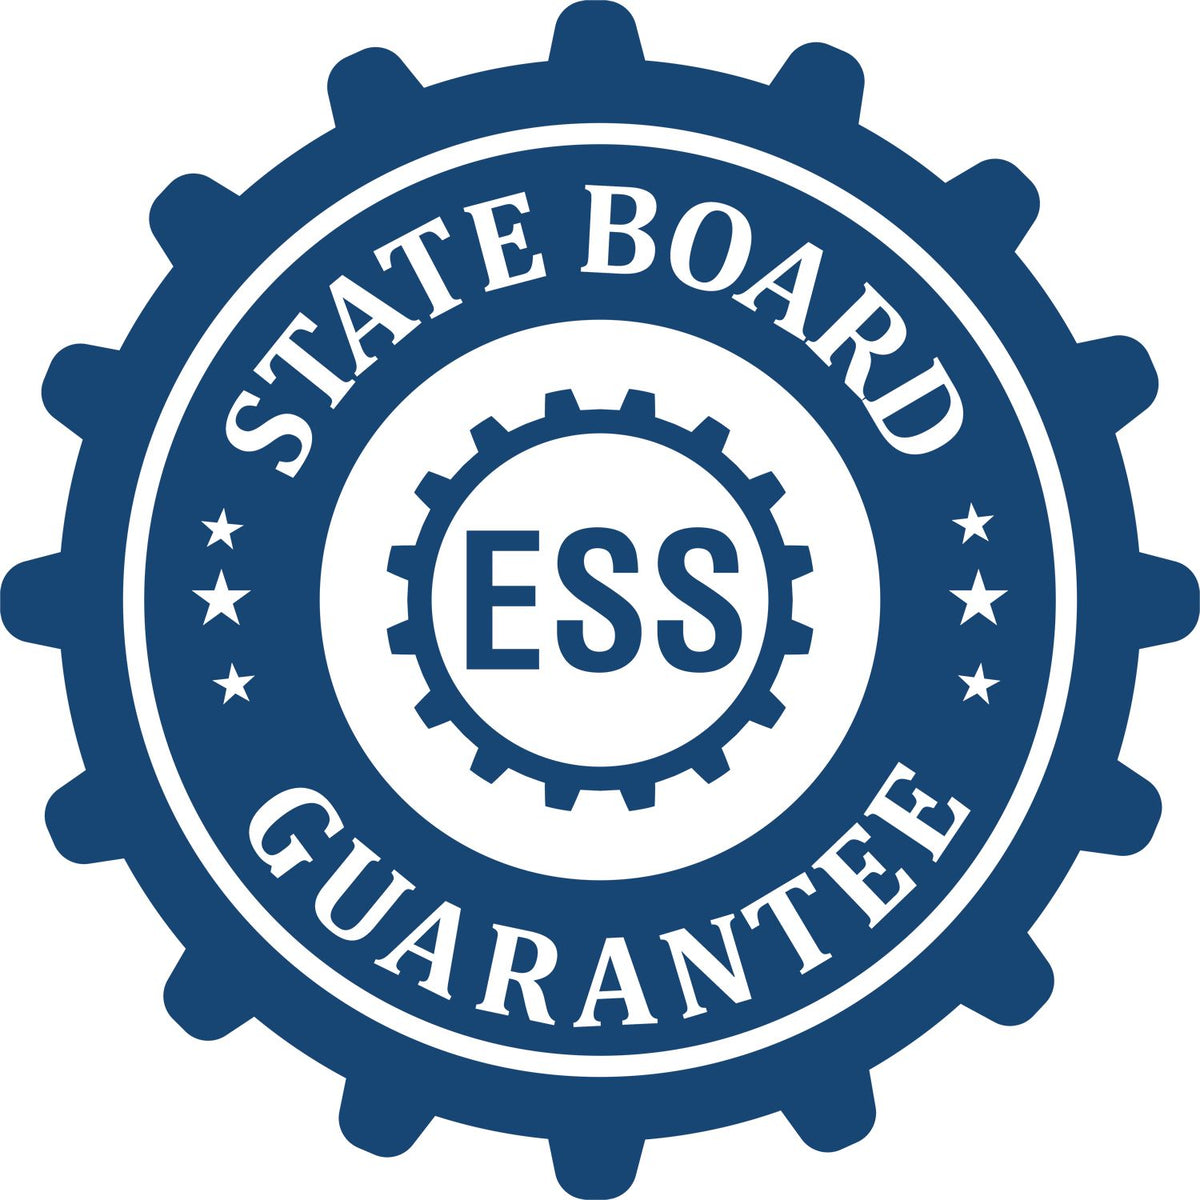 An emblem in a gear shape illustrating a state board guarantee for the Digital Montana PE Stamp and Electronic Seal for Montana Engineer product.